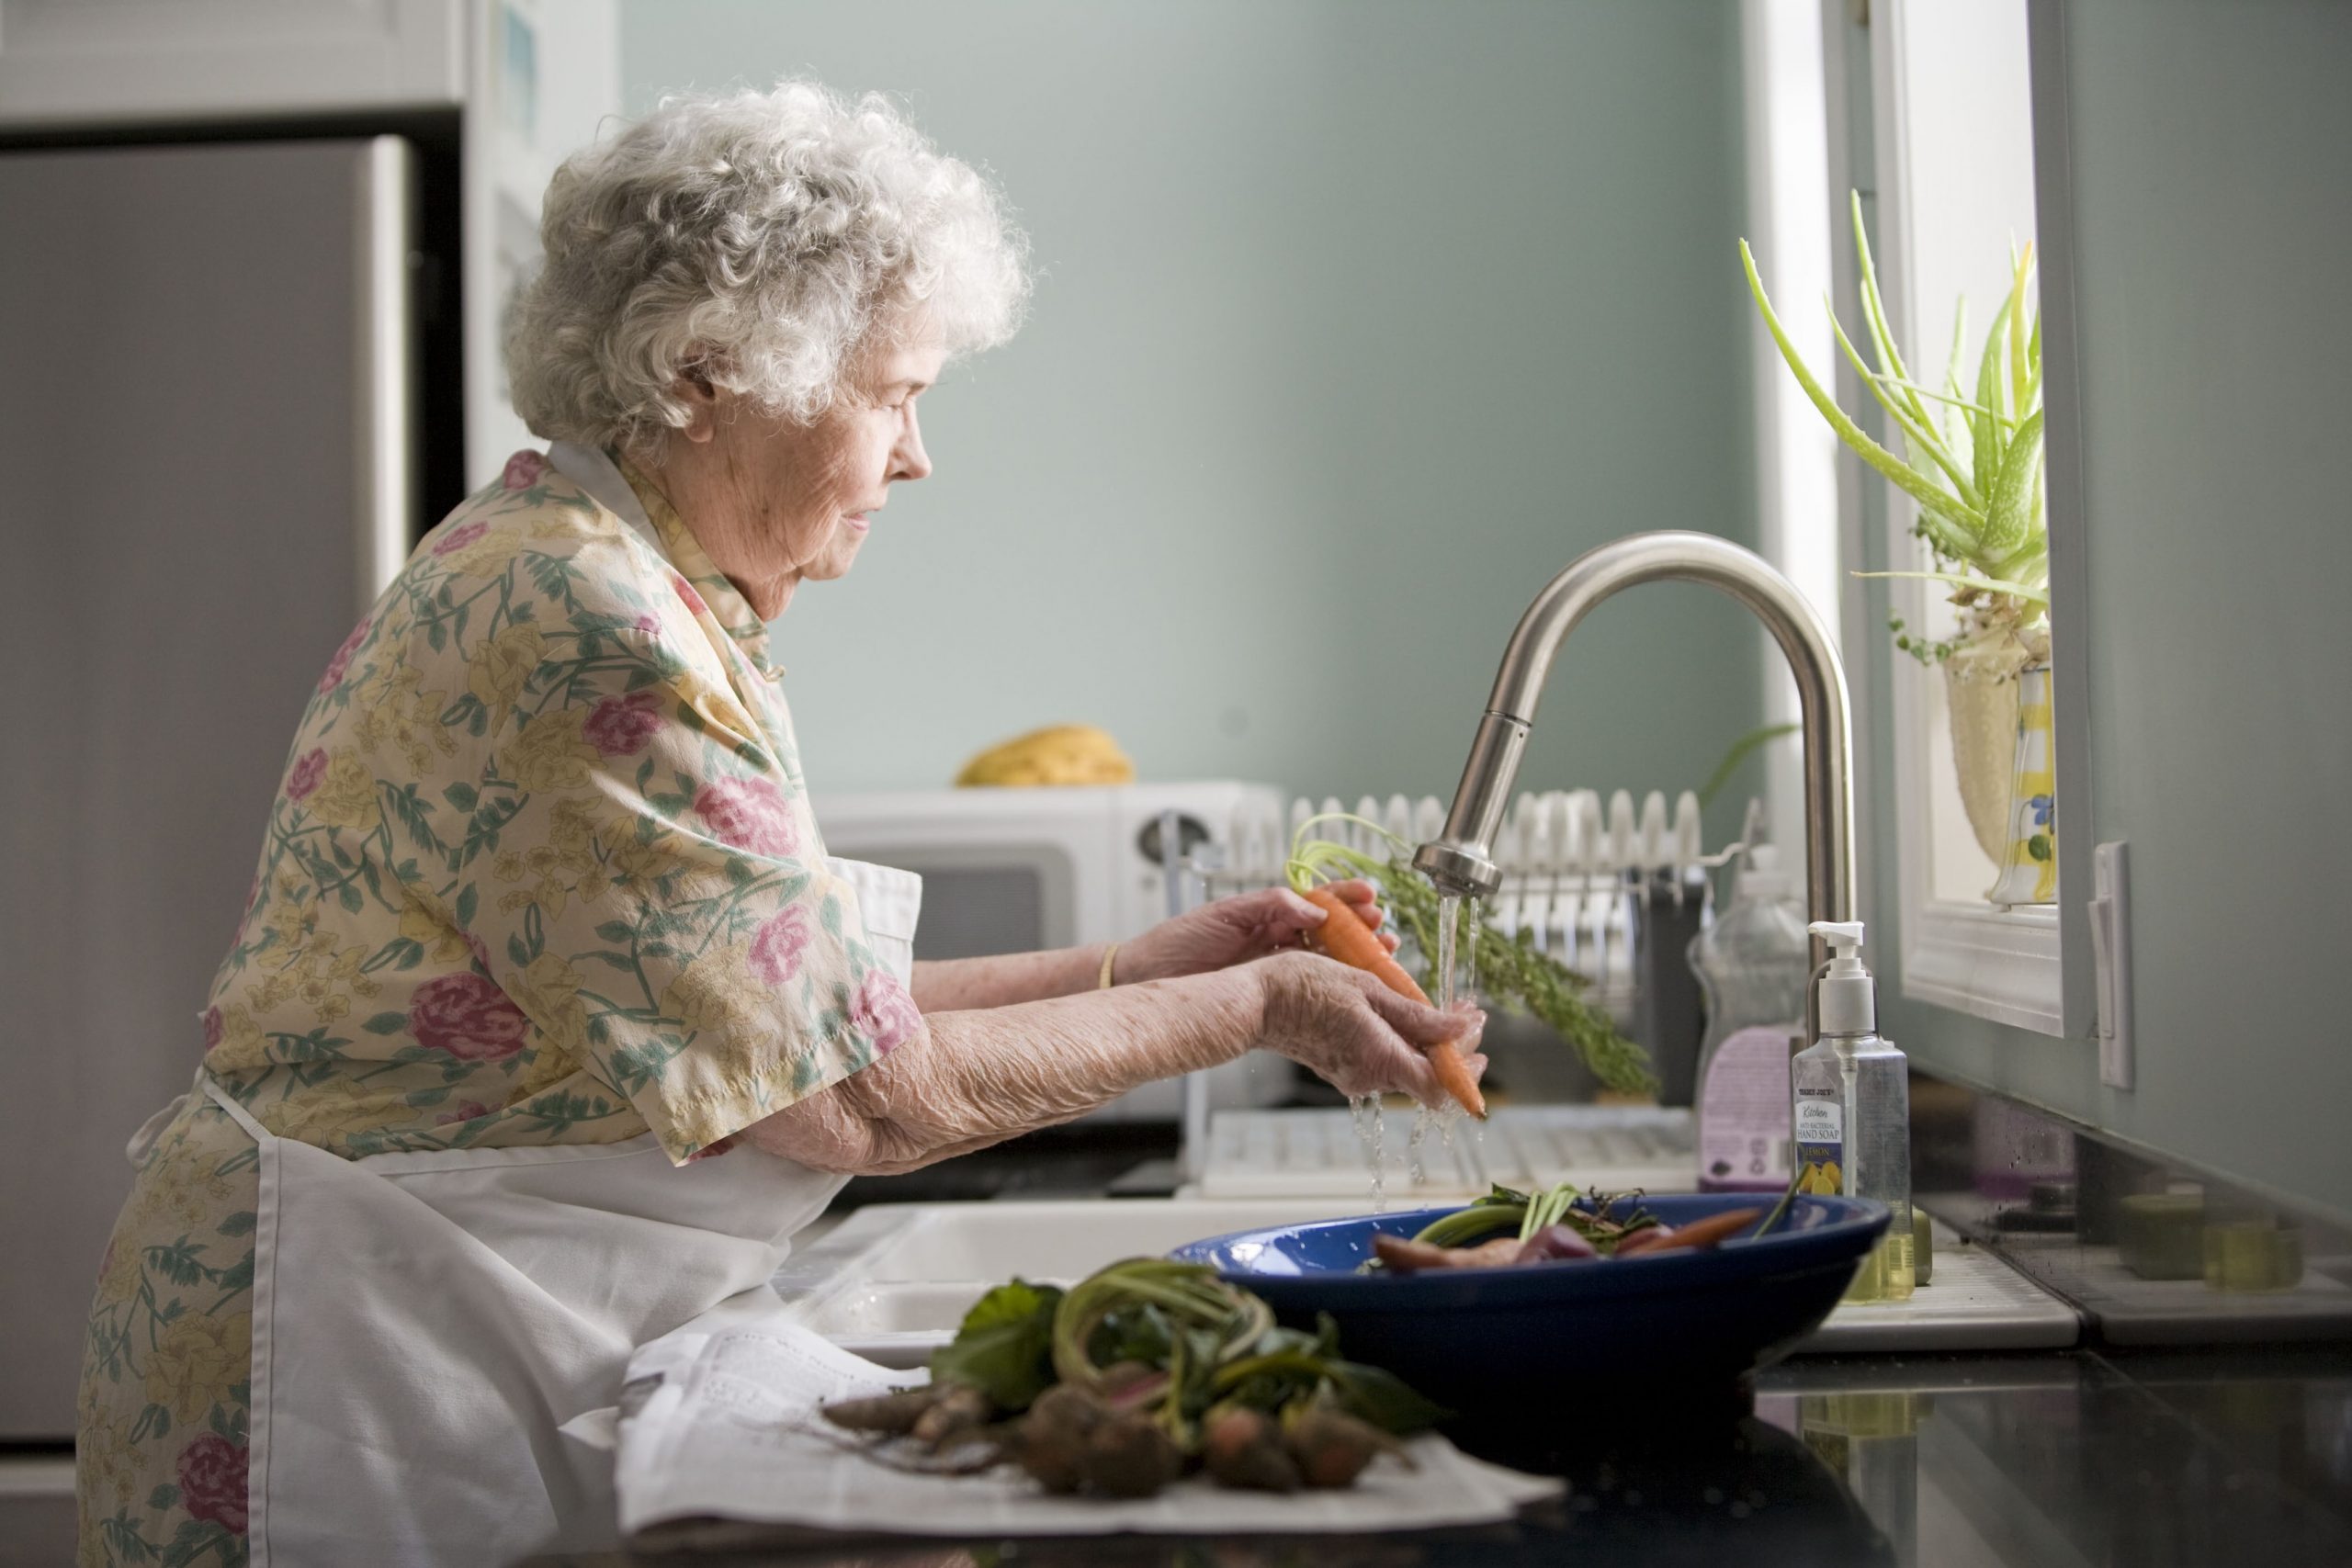 We round up the best and most useful kitchen gadgets and utensils that can help and aid the elderly and disabled in the kitchen.